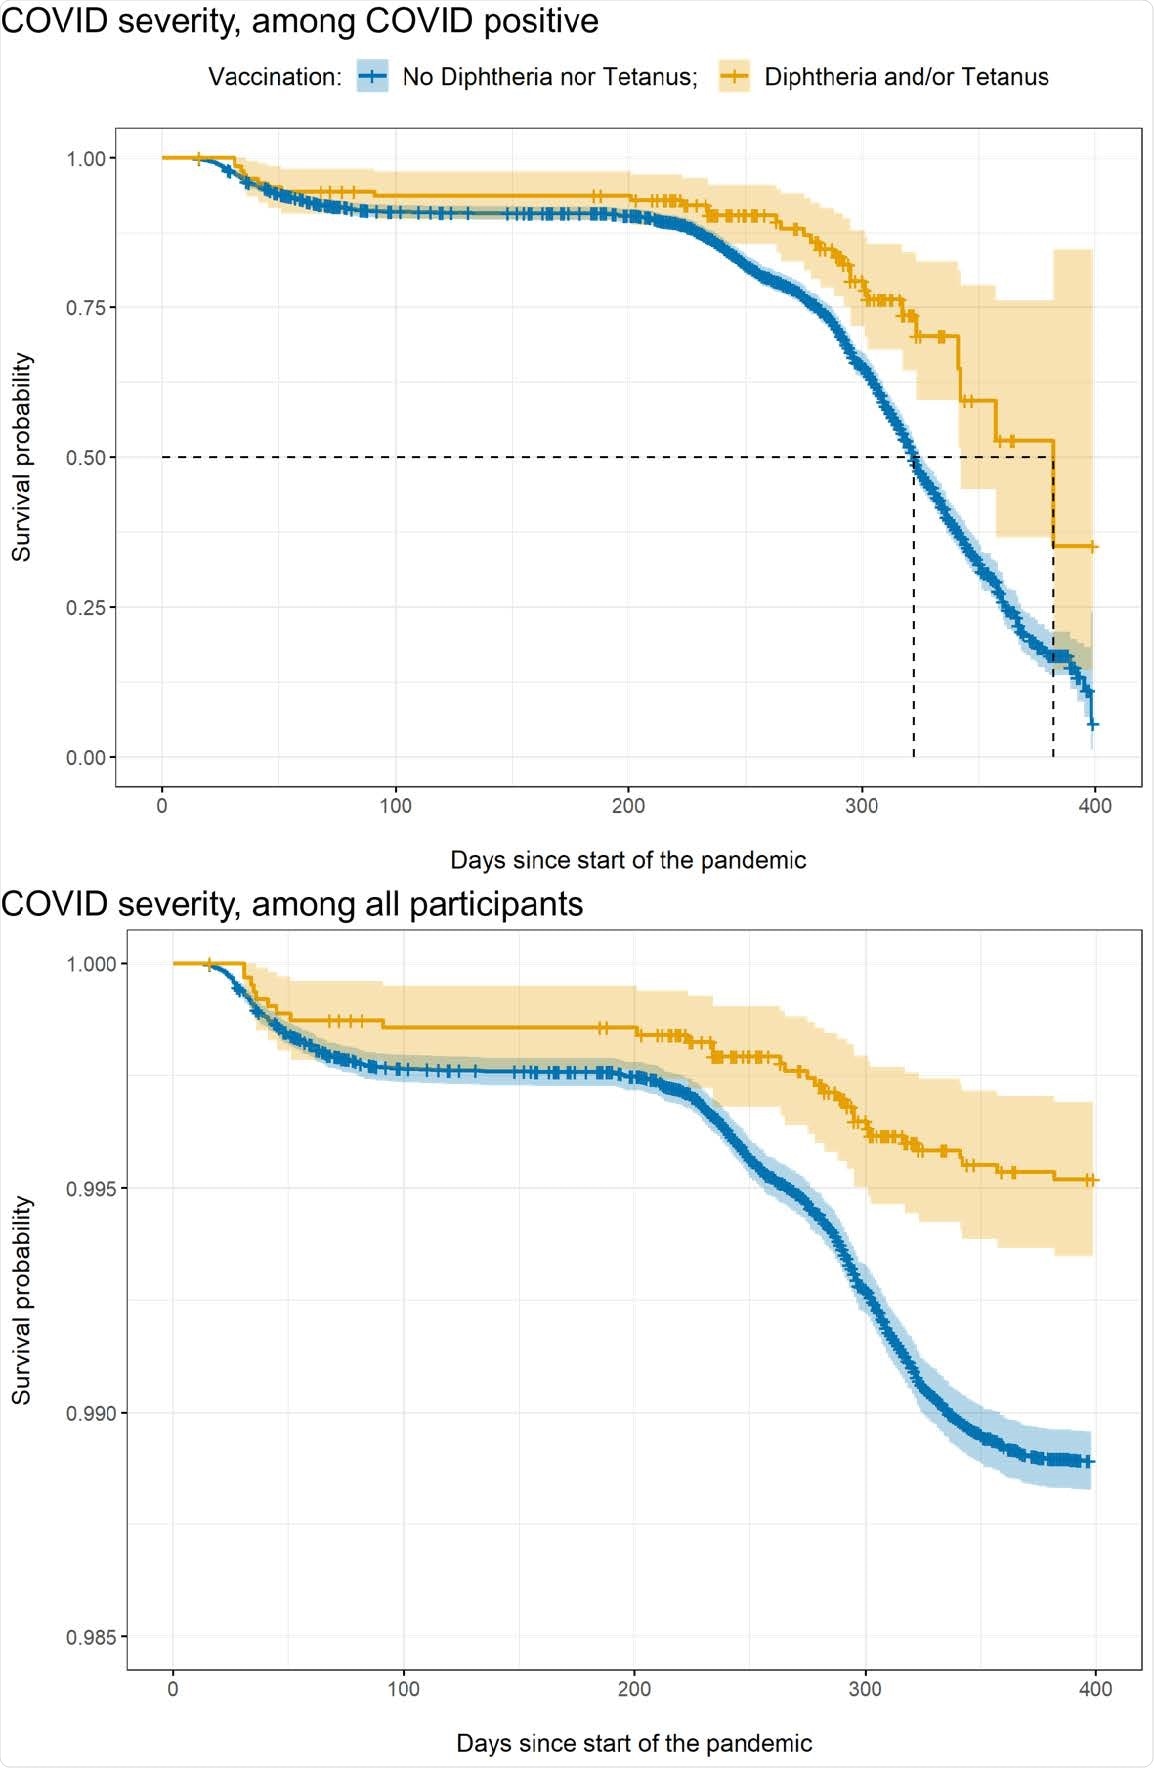 Kaplan Meier survival curves, reflecting the probability over time of developing a severe case of COVID- 19 among COVID-19 cases (top) and across the full sample (bottom), split by vaccination status. The x-axis indicates the number of days since the start of the pandemic in the UK, the y-axis indicates the survival probability. The orange line represents the survival probability for those with a diphtheria and/or tetanus vaccination, while the blue line captures the survival probability for those without either of these vaccinations.